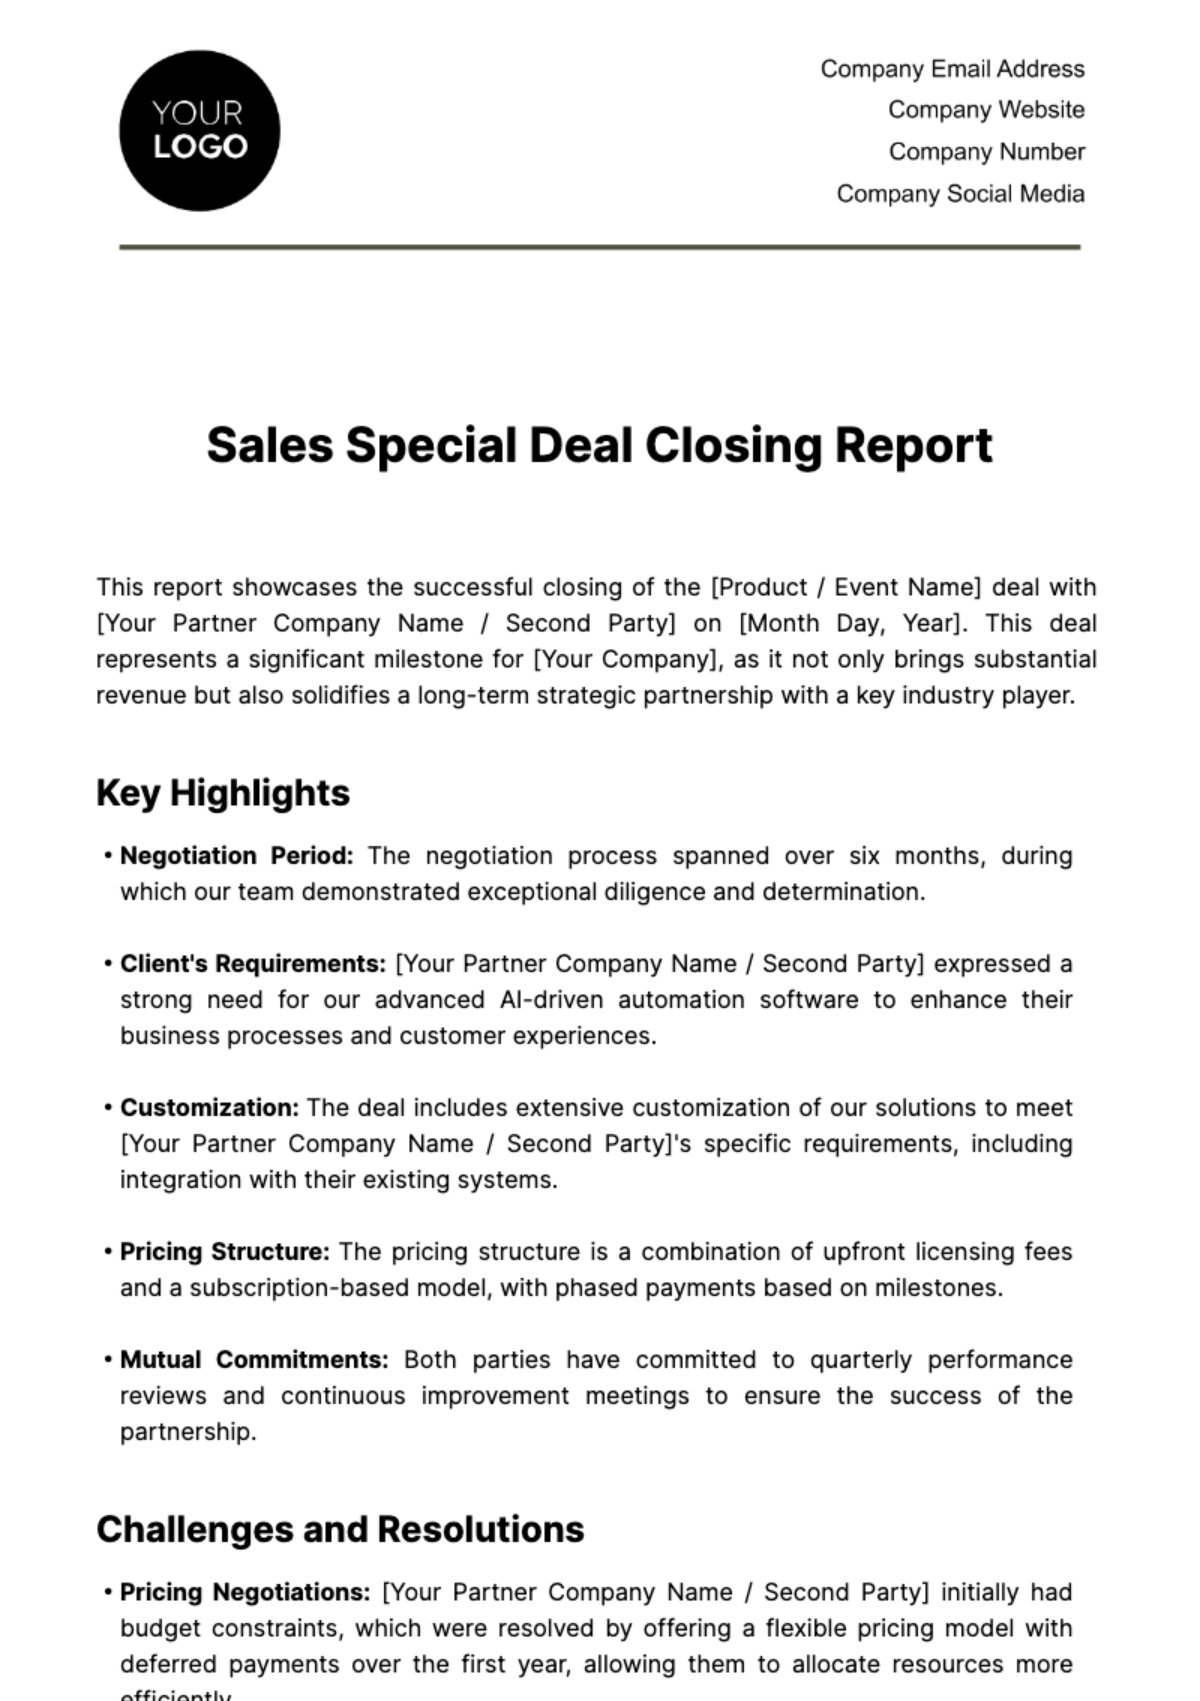 Sales Special Deal Closing Report Template